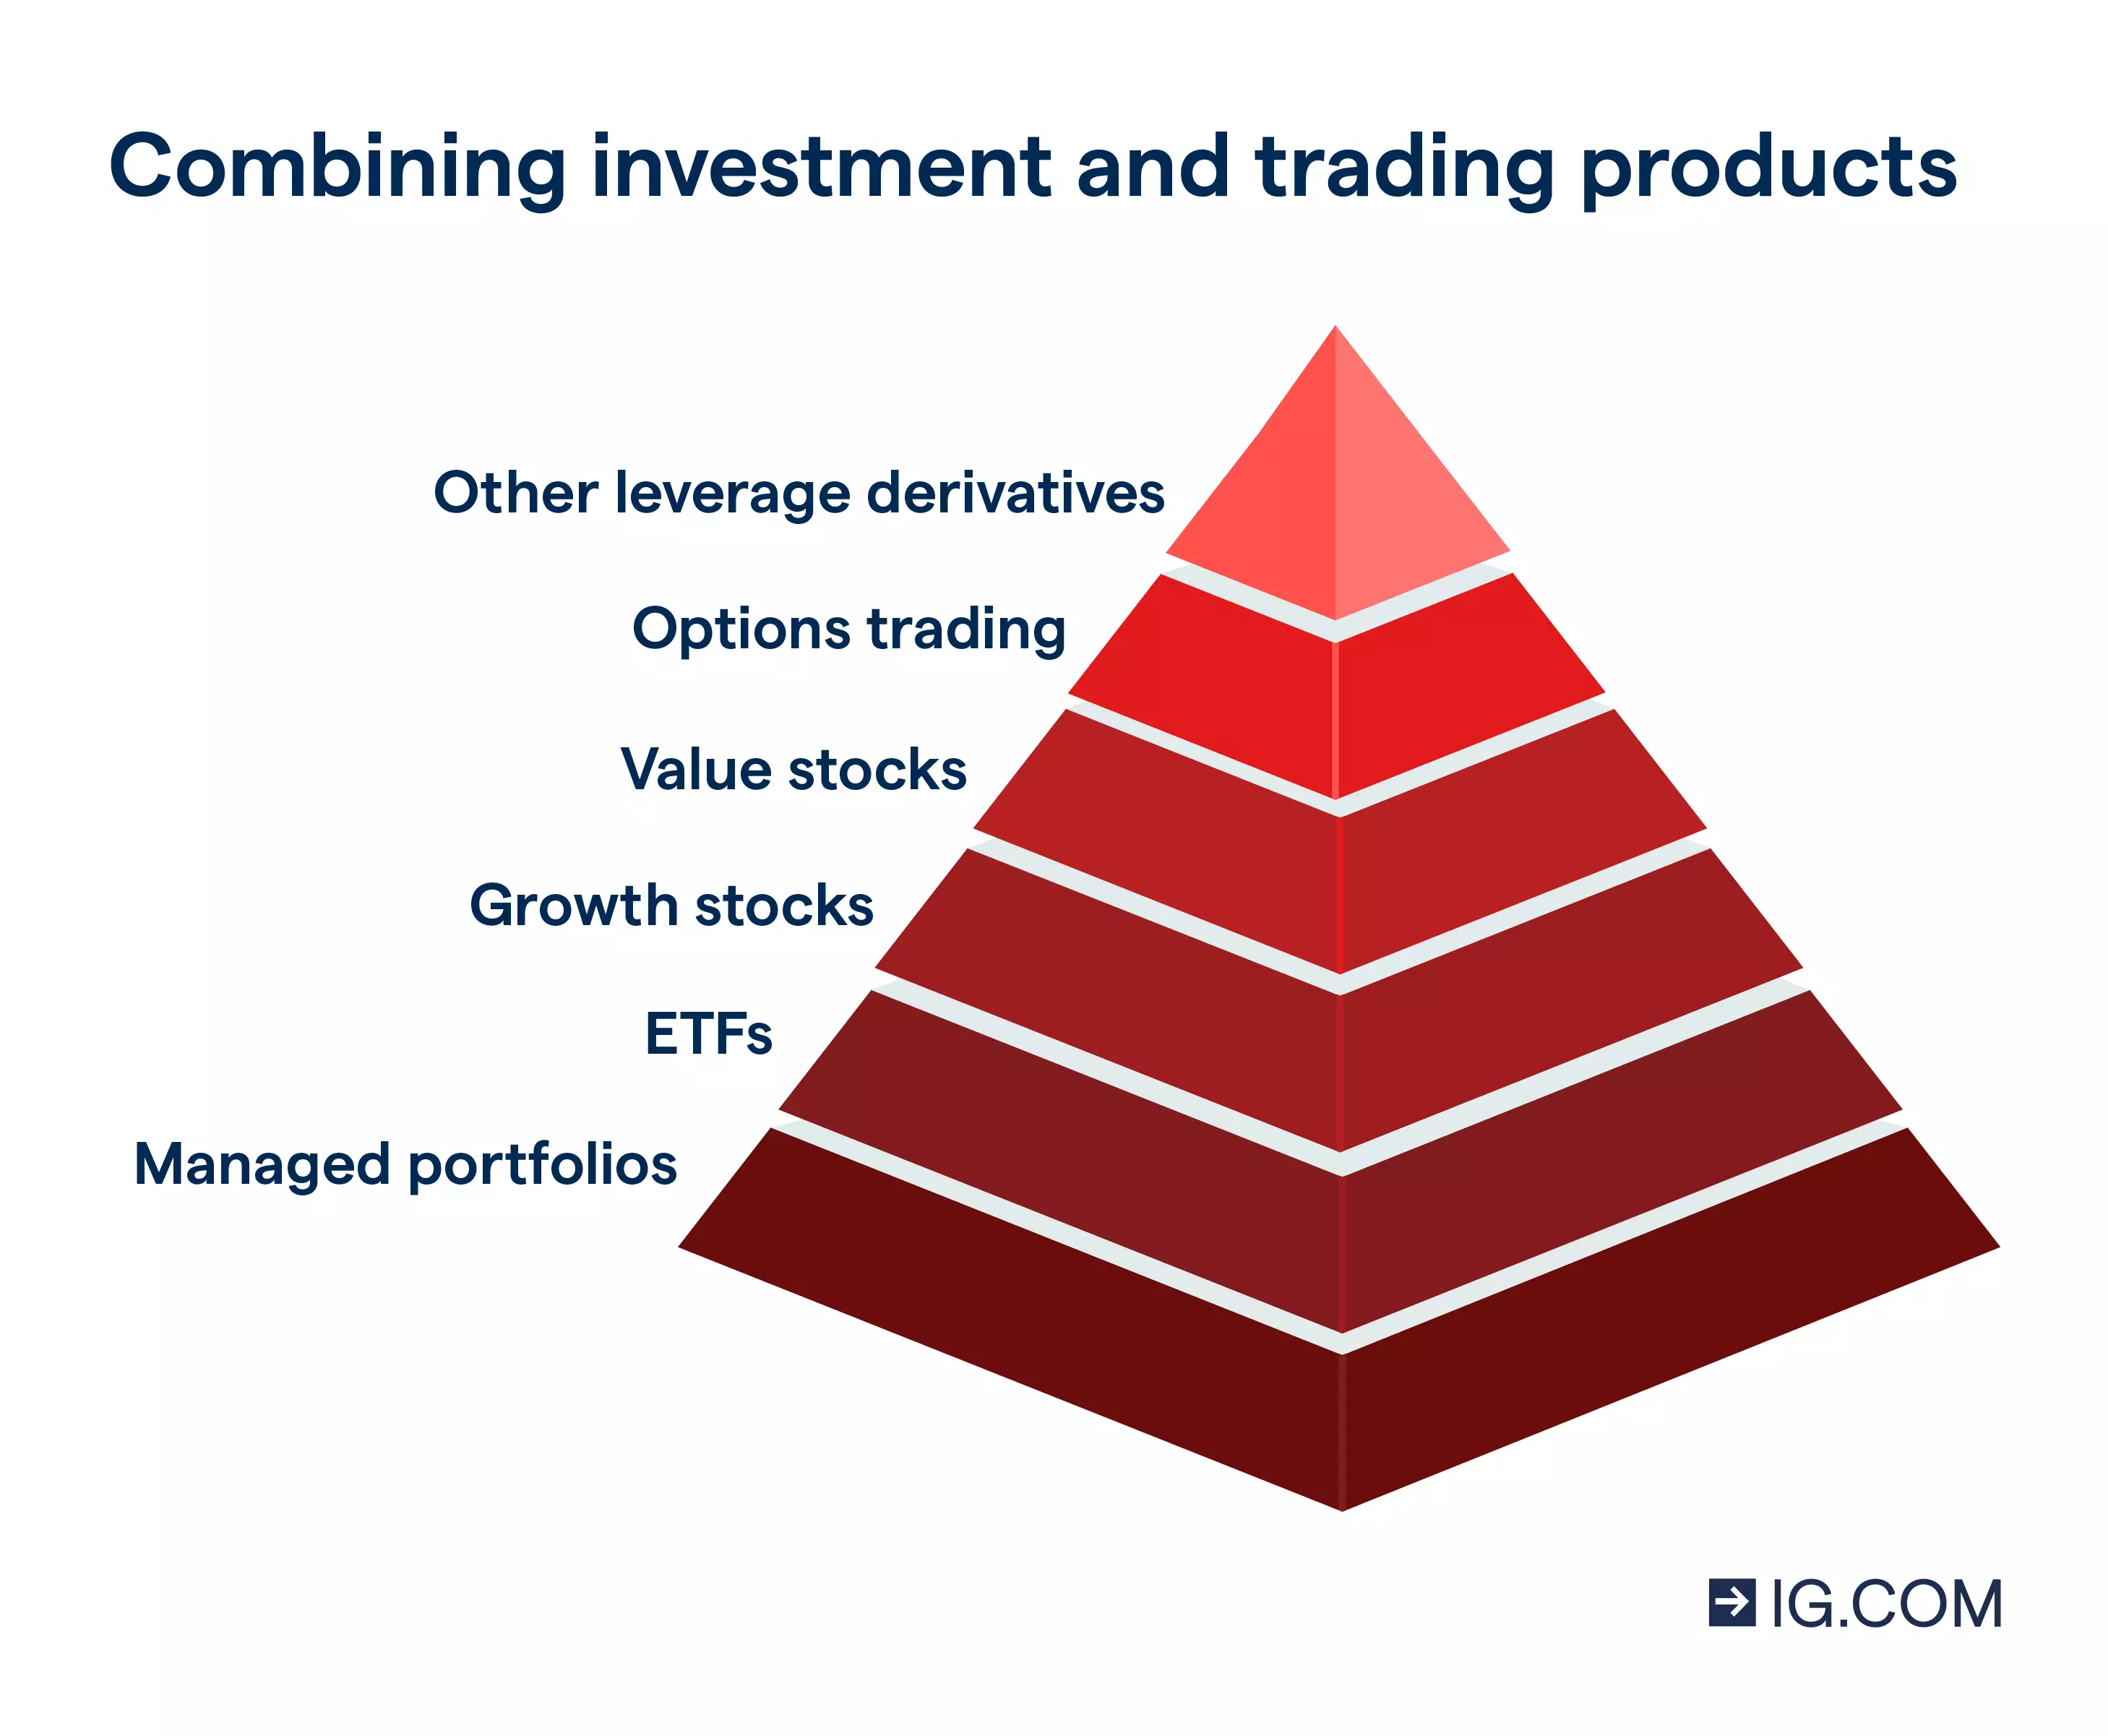 A diagram of a pyramid depicting a portfolio that combines investment and trading products.